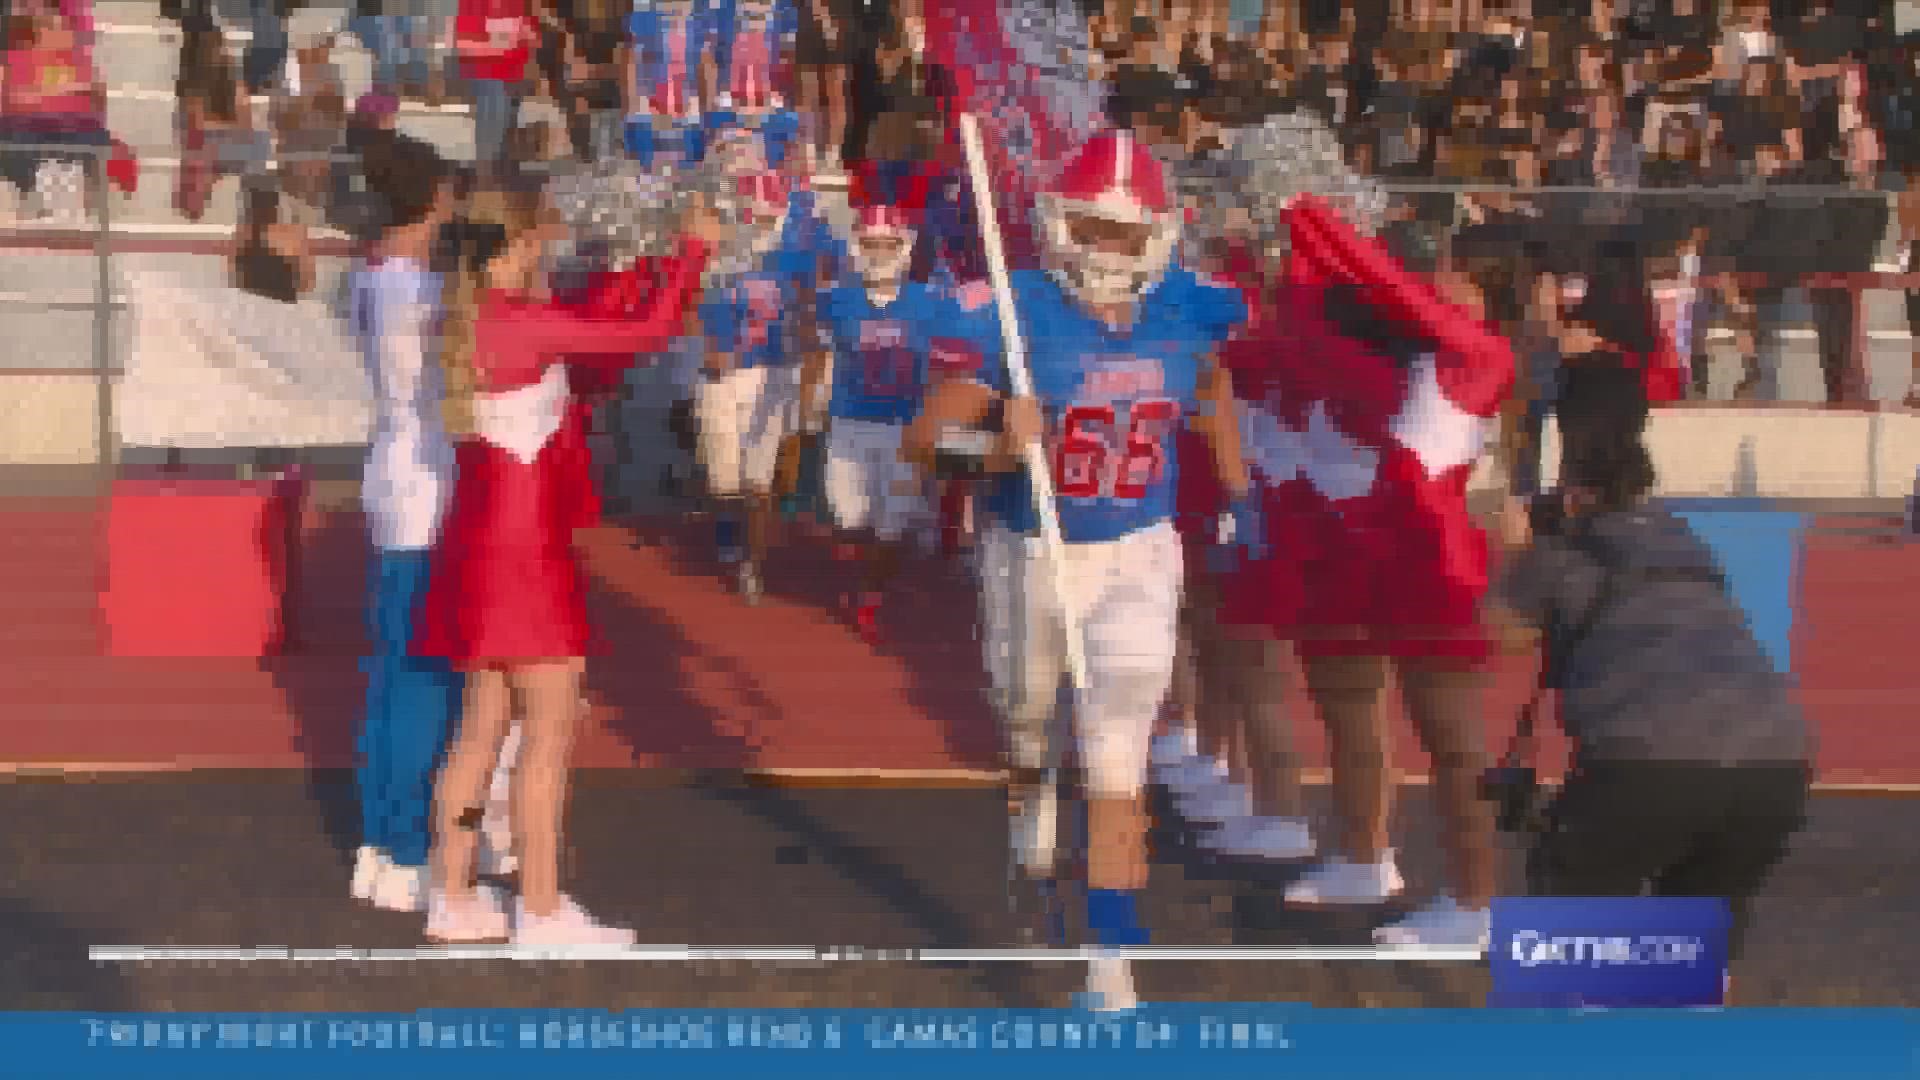 The Nampa Bulldogs improved to 3-1 Friday night after defeating the Kuna Kavemen (3-2) 45-23. Nampa has won three-straight games since Week 1.